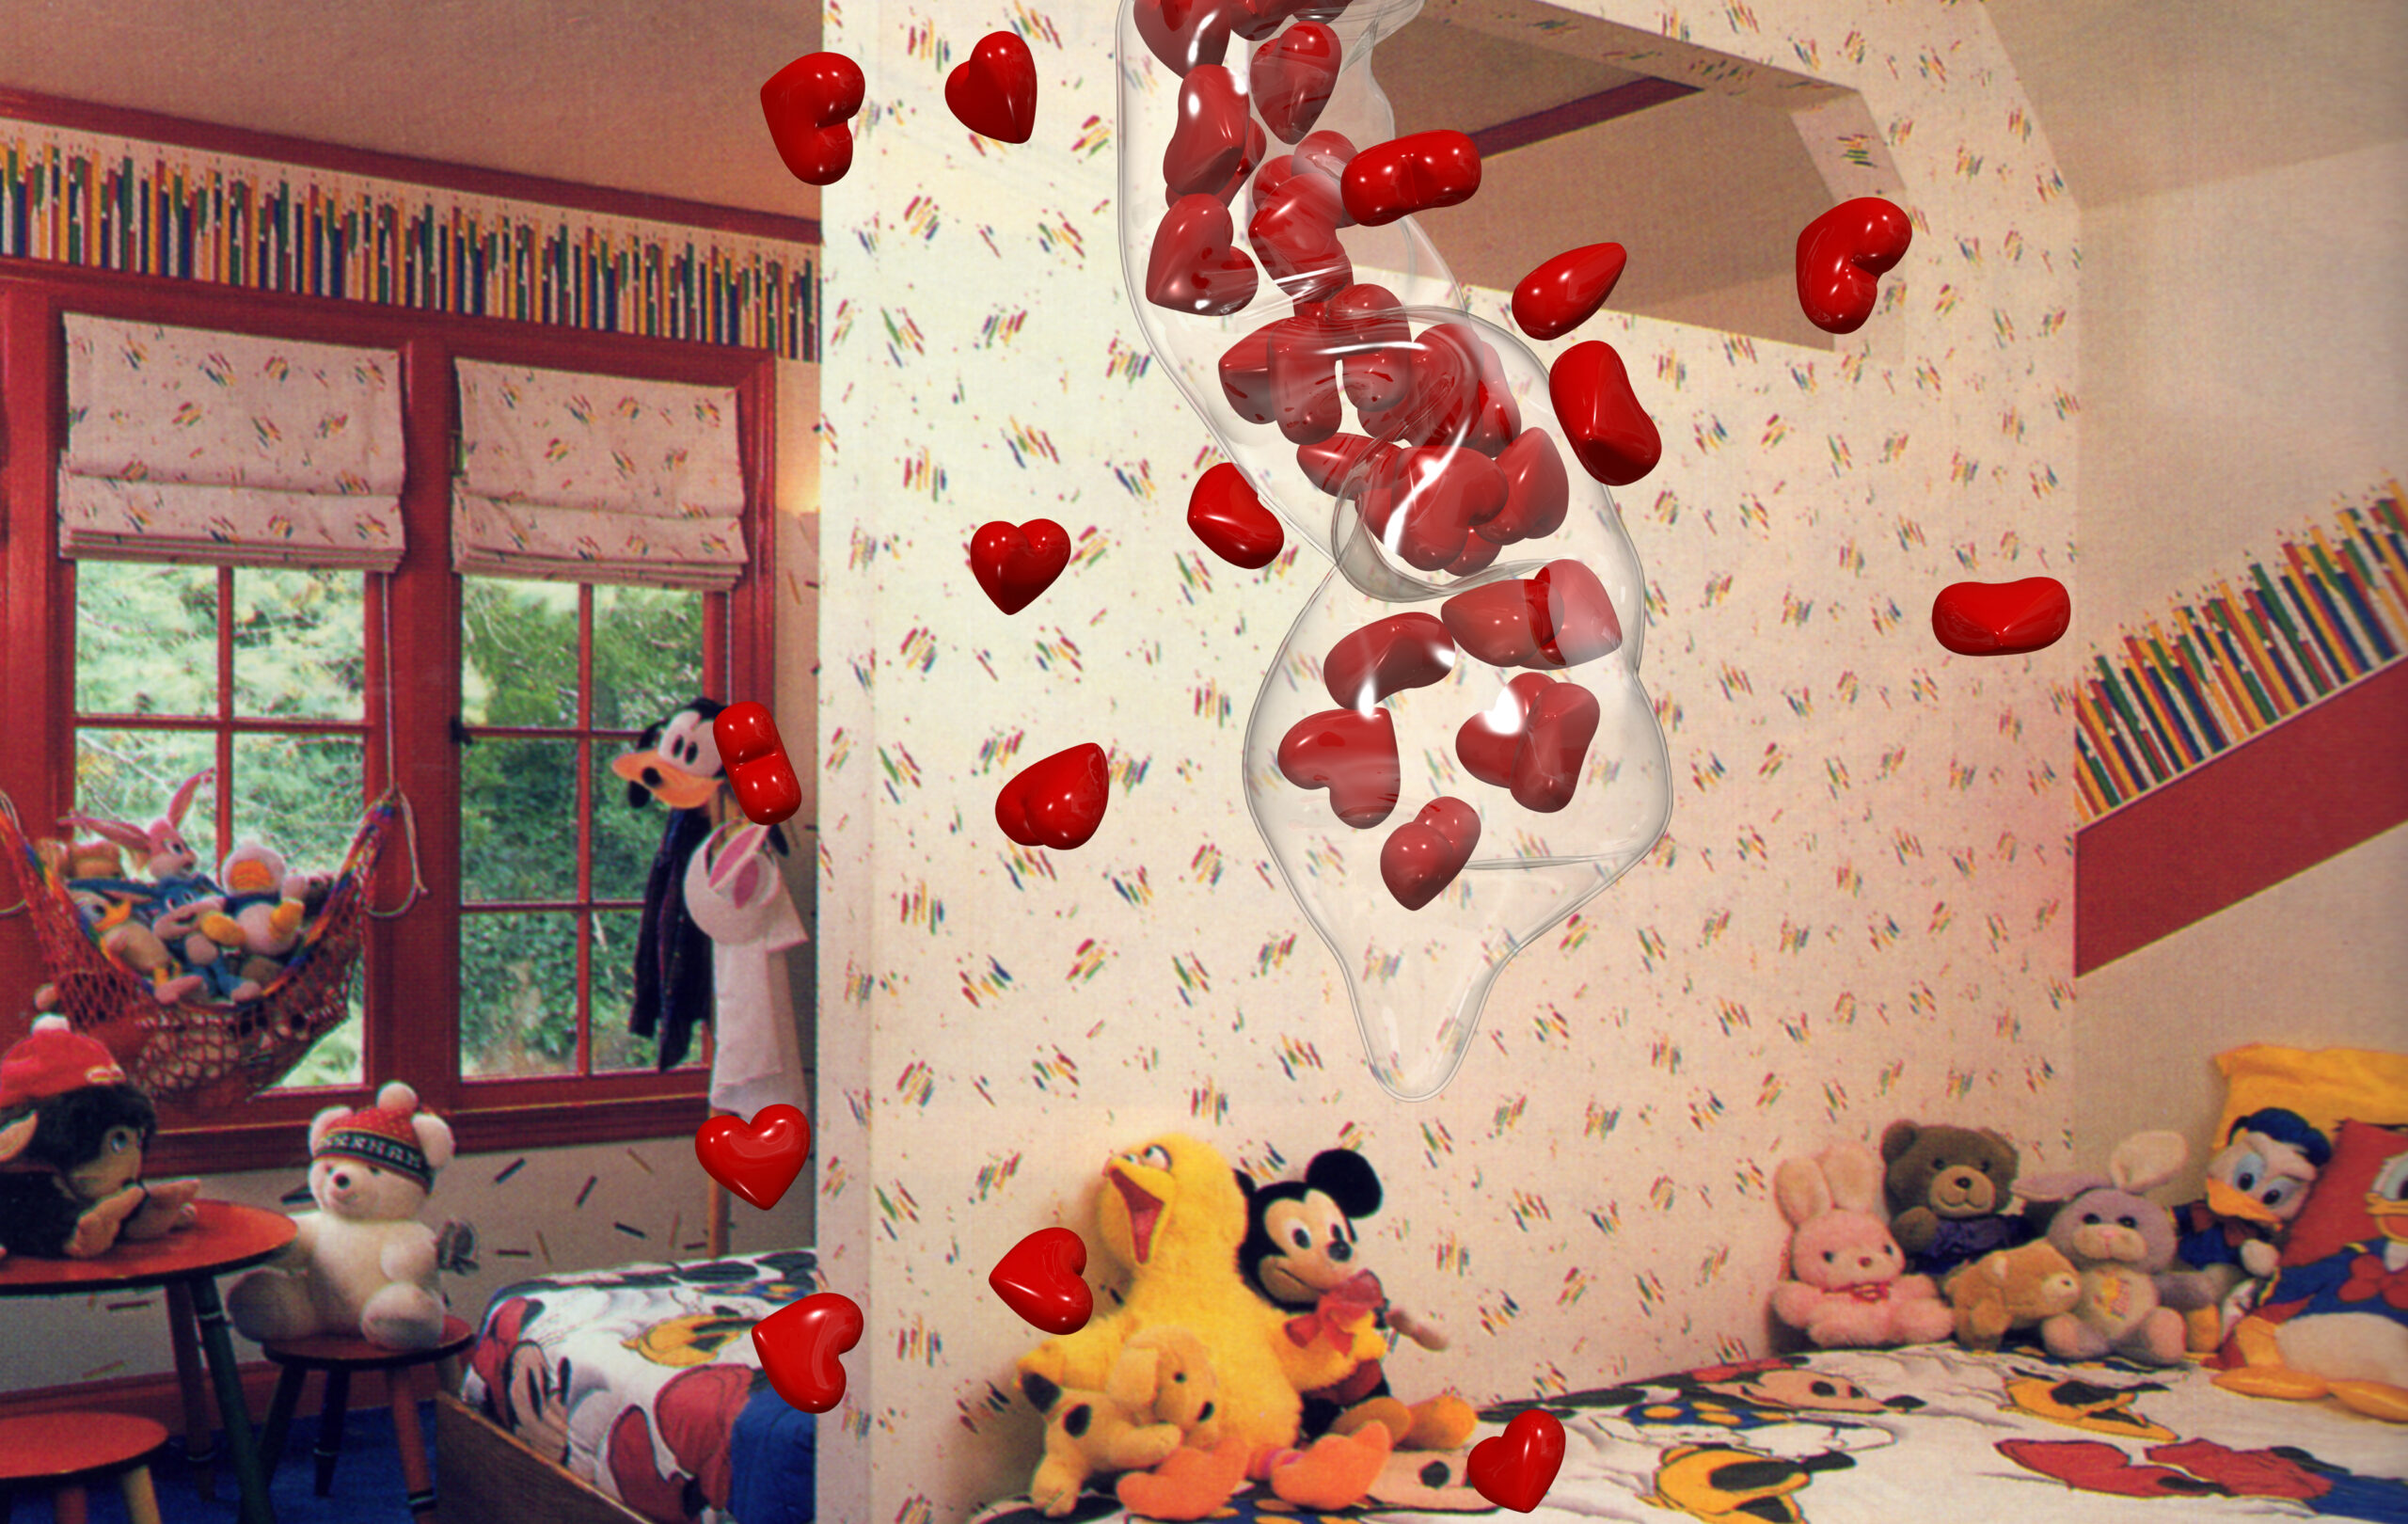 In a kids bedroom with stuffed animals an animated condom filled with red hearts floats in the air